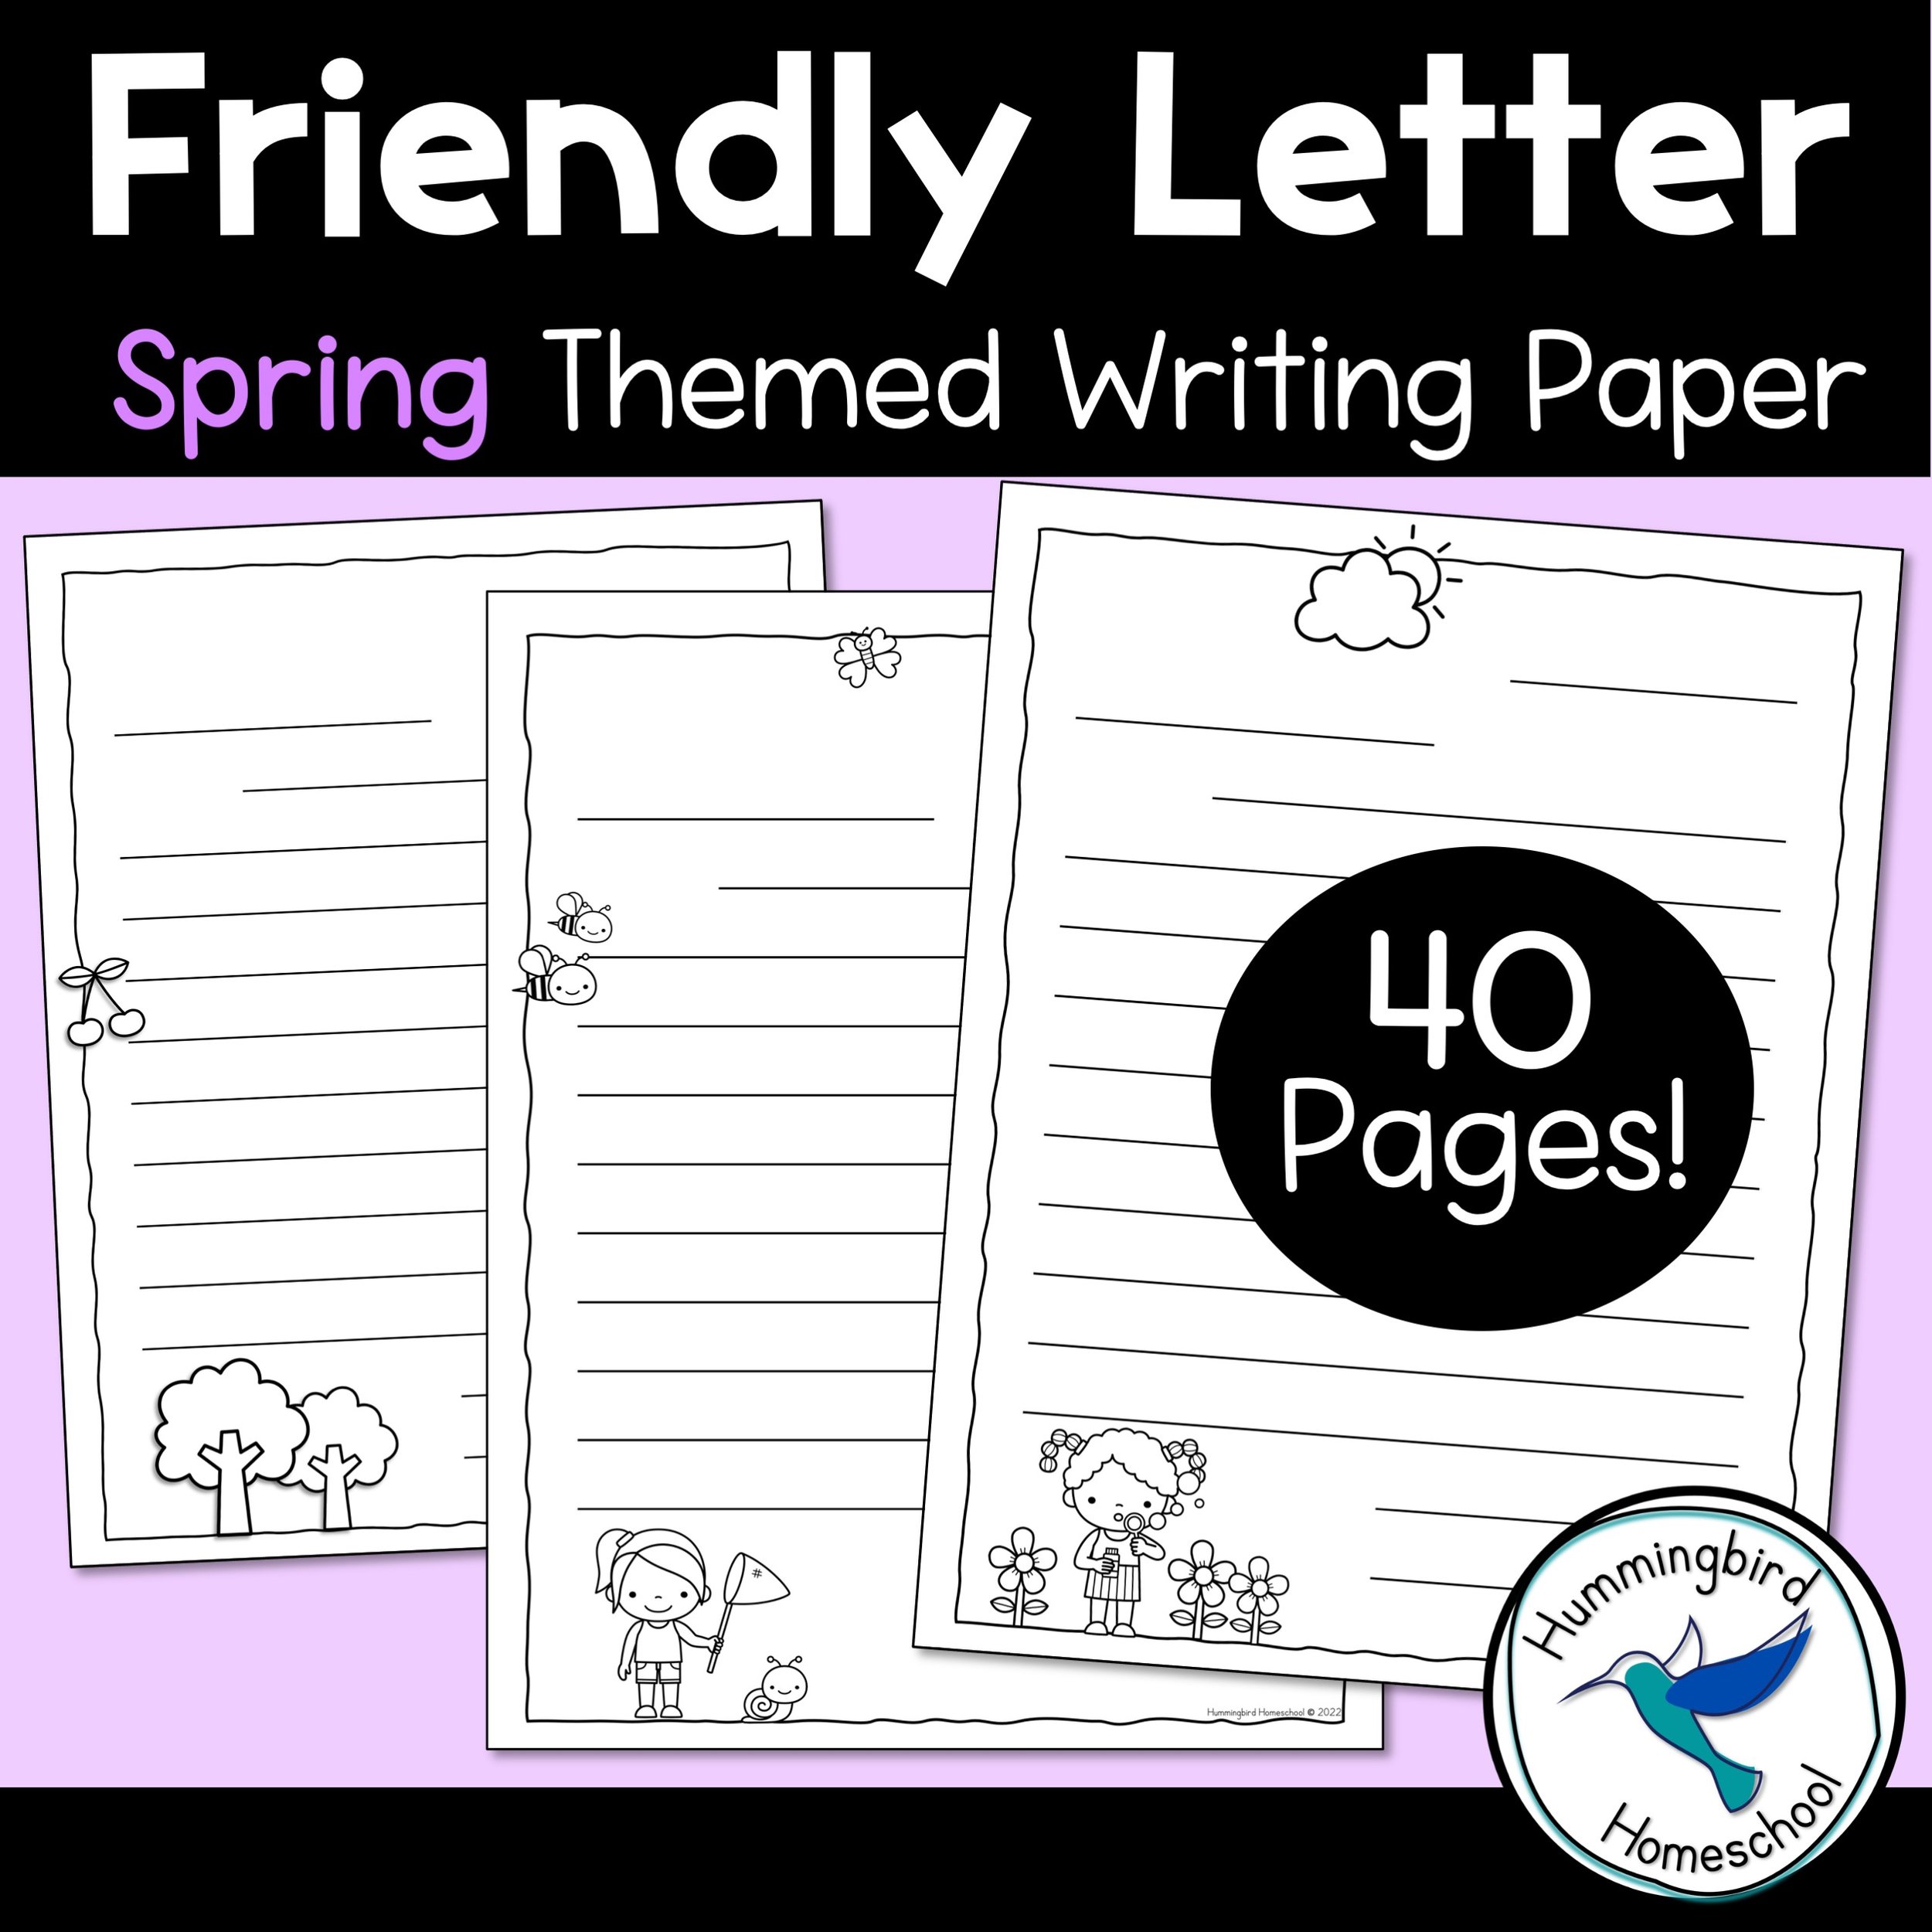 Friendly Letter Writing Paper  Friendly letter writing, Letter